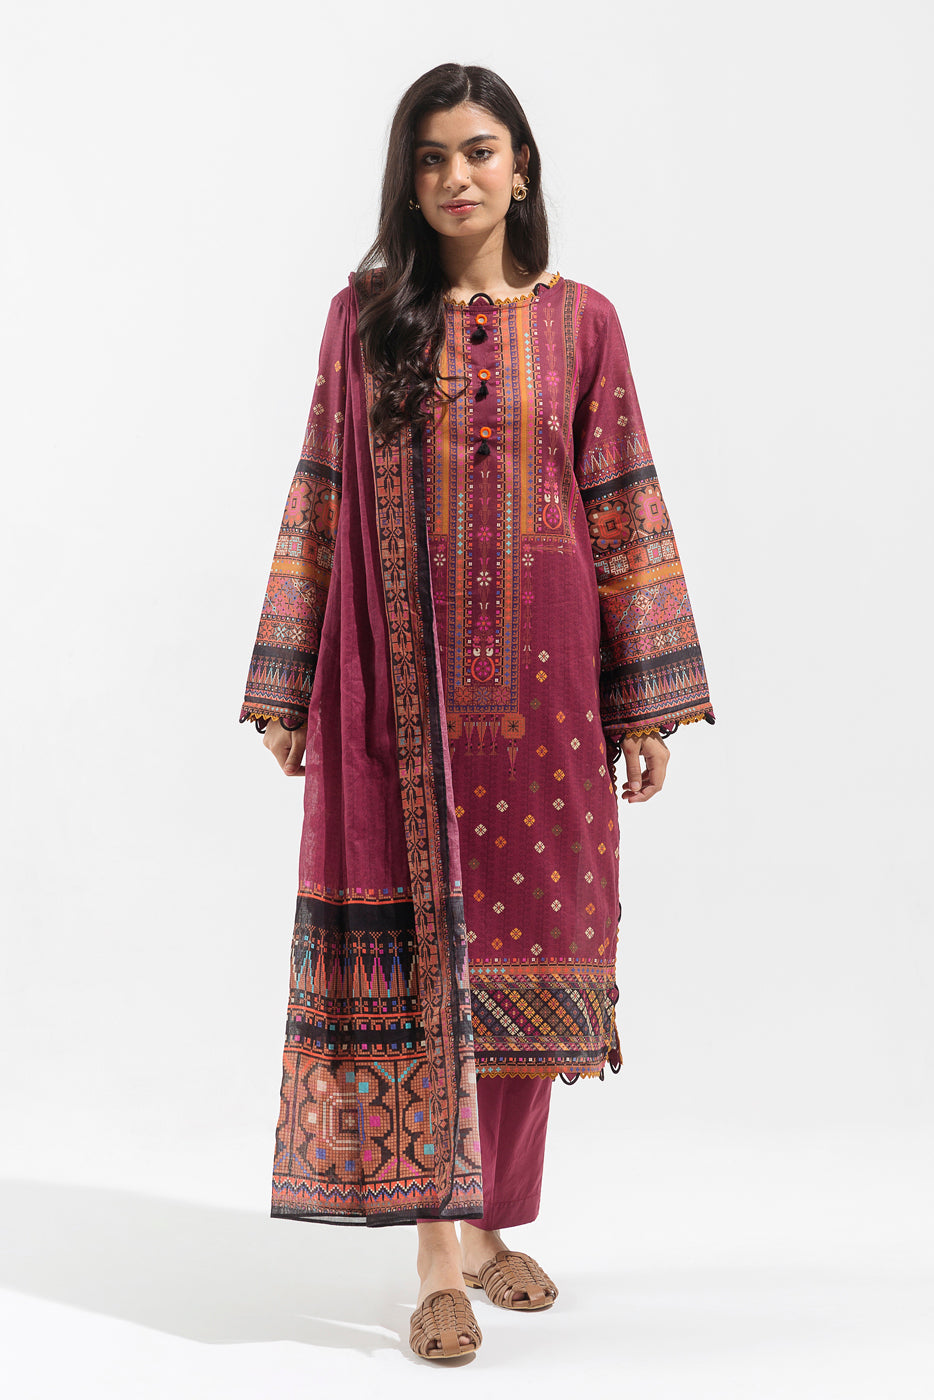 3 PIECE - PRINTED LAWN SUIT - MULBERRY TRIBE